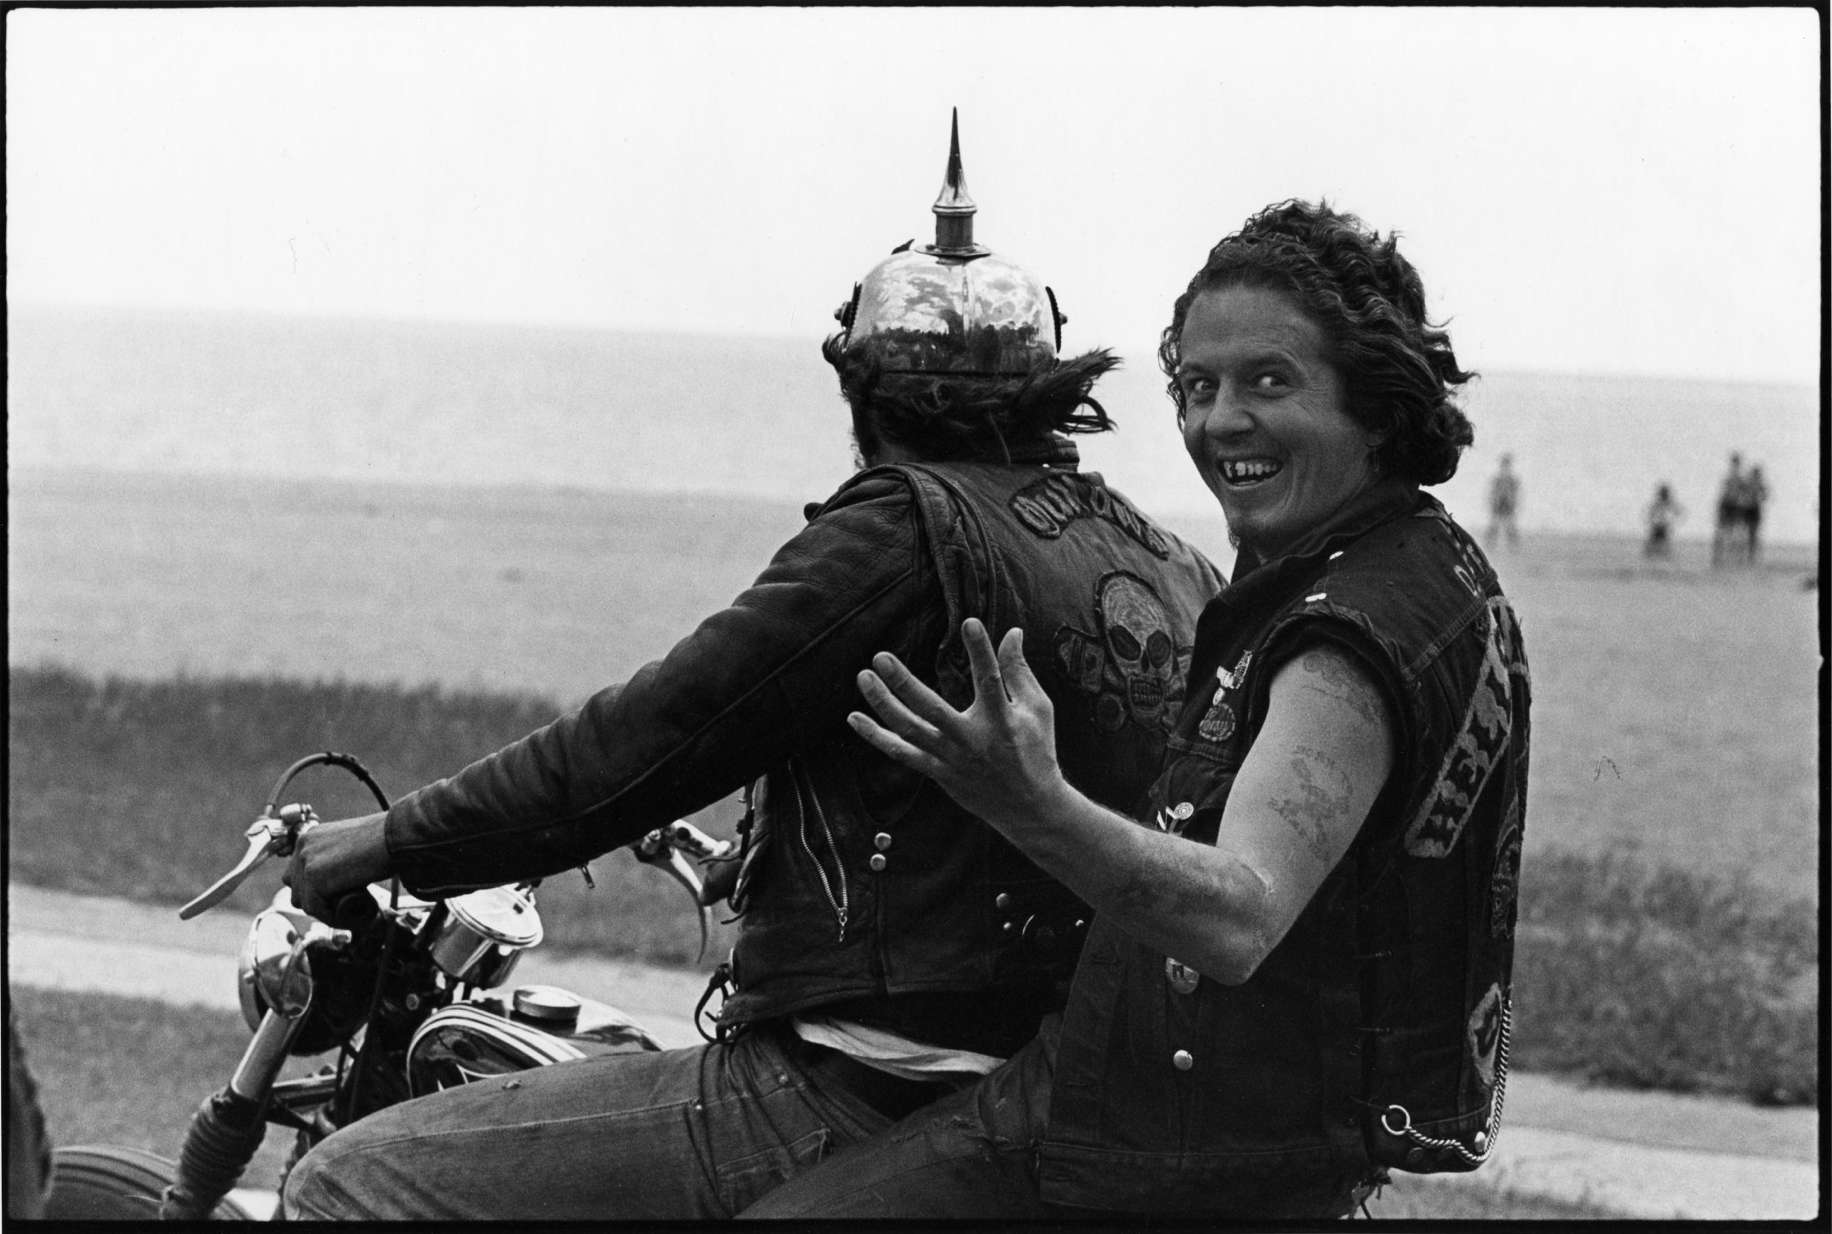 Danny Lyon: The Bikeriders, Funny Sonny packing with Zipco 